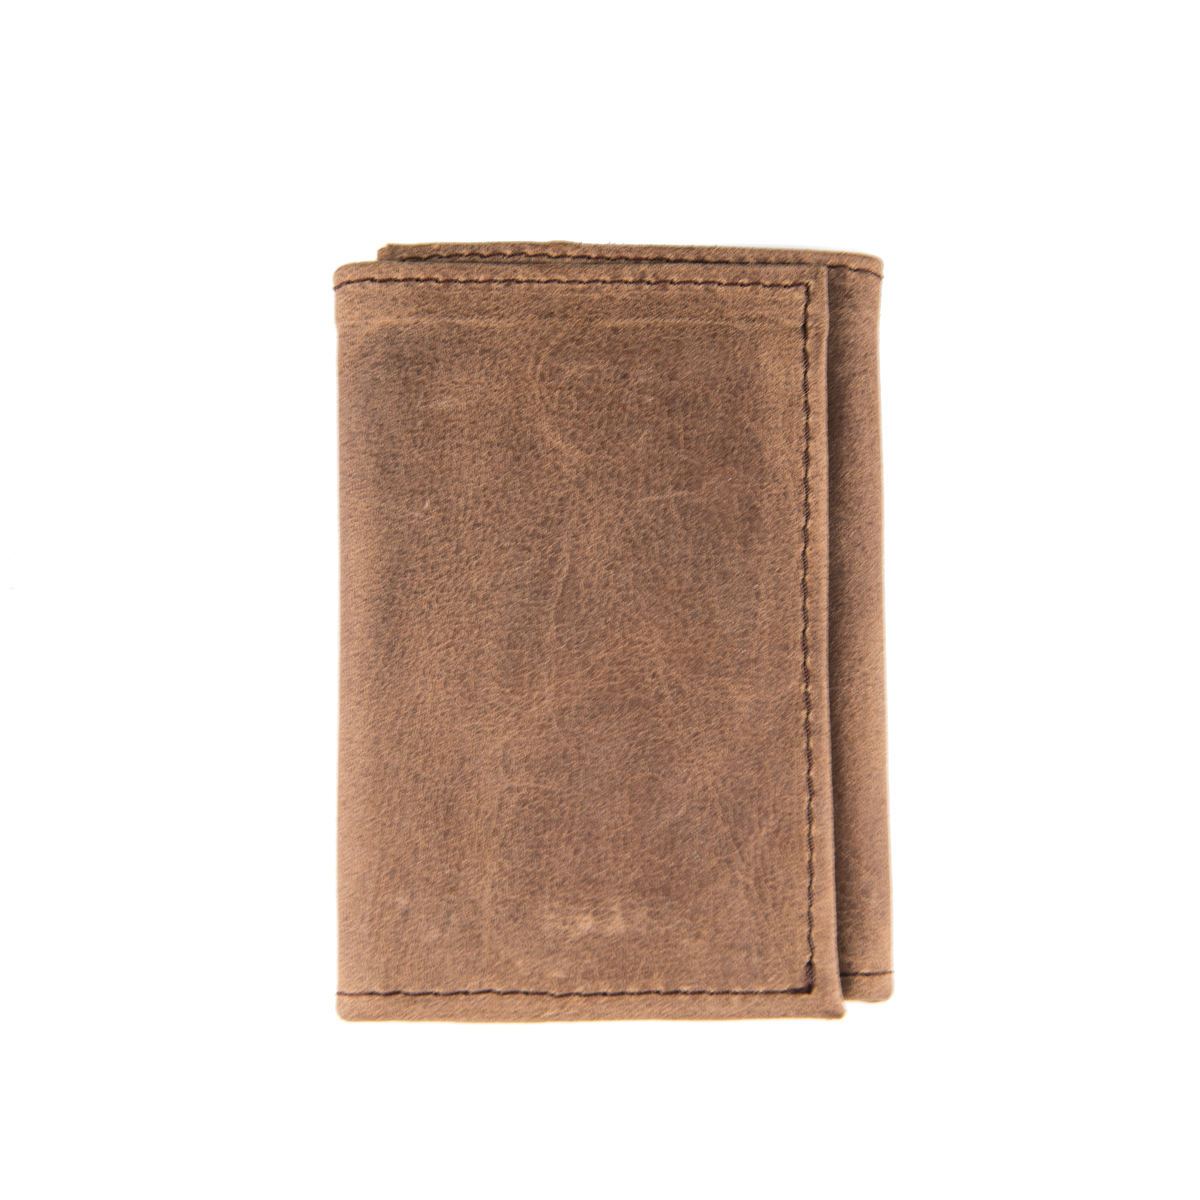 Utah Utes Deluxe Leather Tri-Fold Wallet